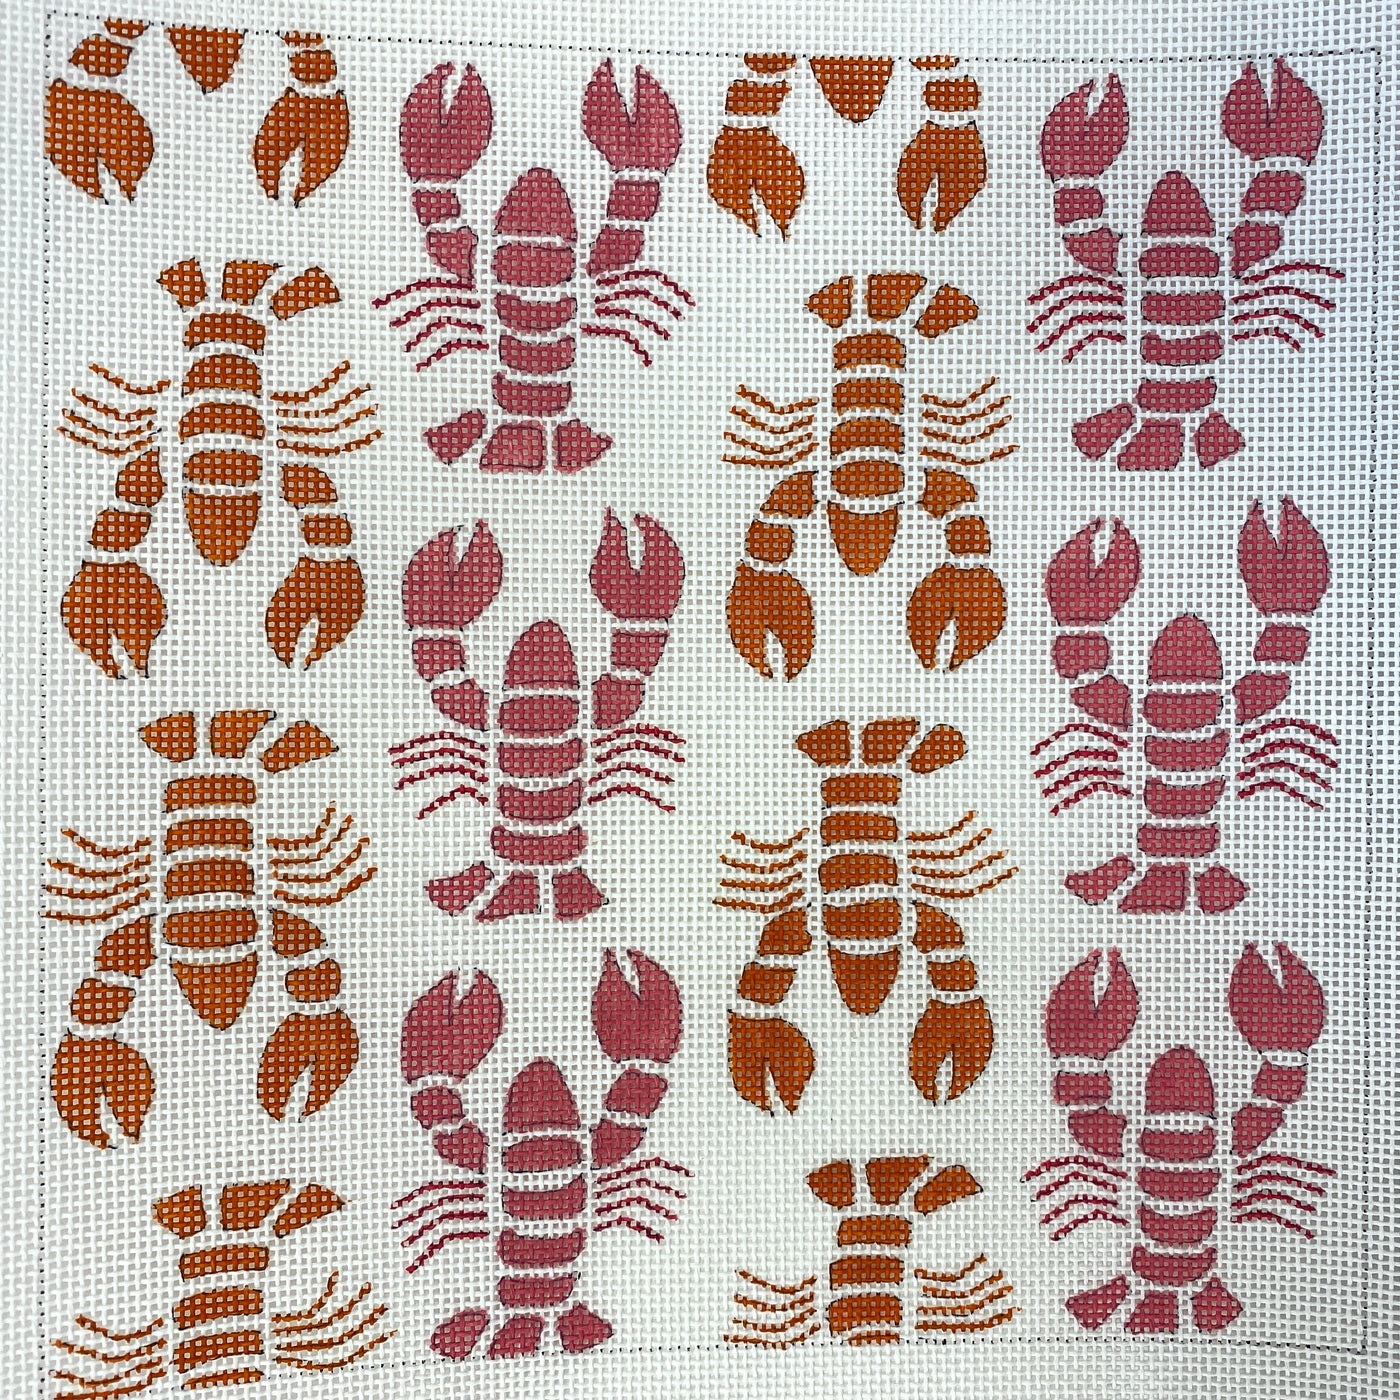 Pink & Red Lobsters Needlepoint Canvas